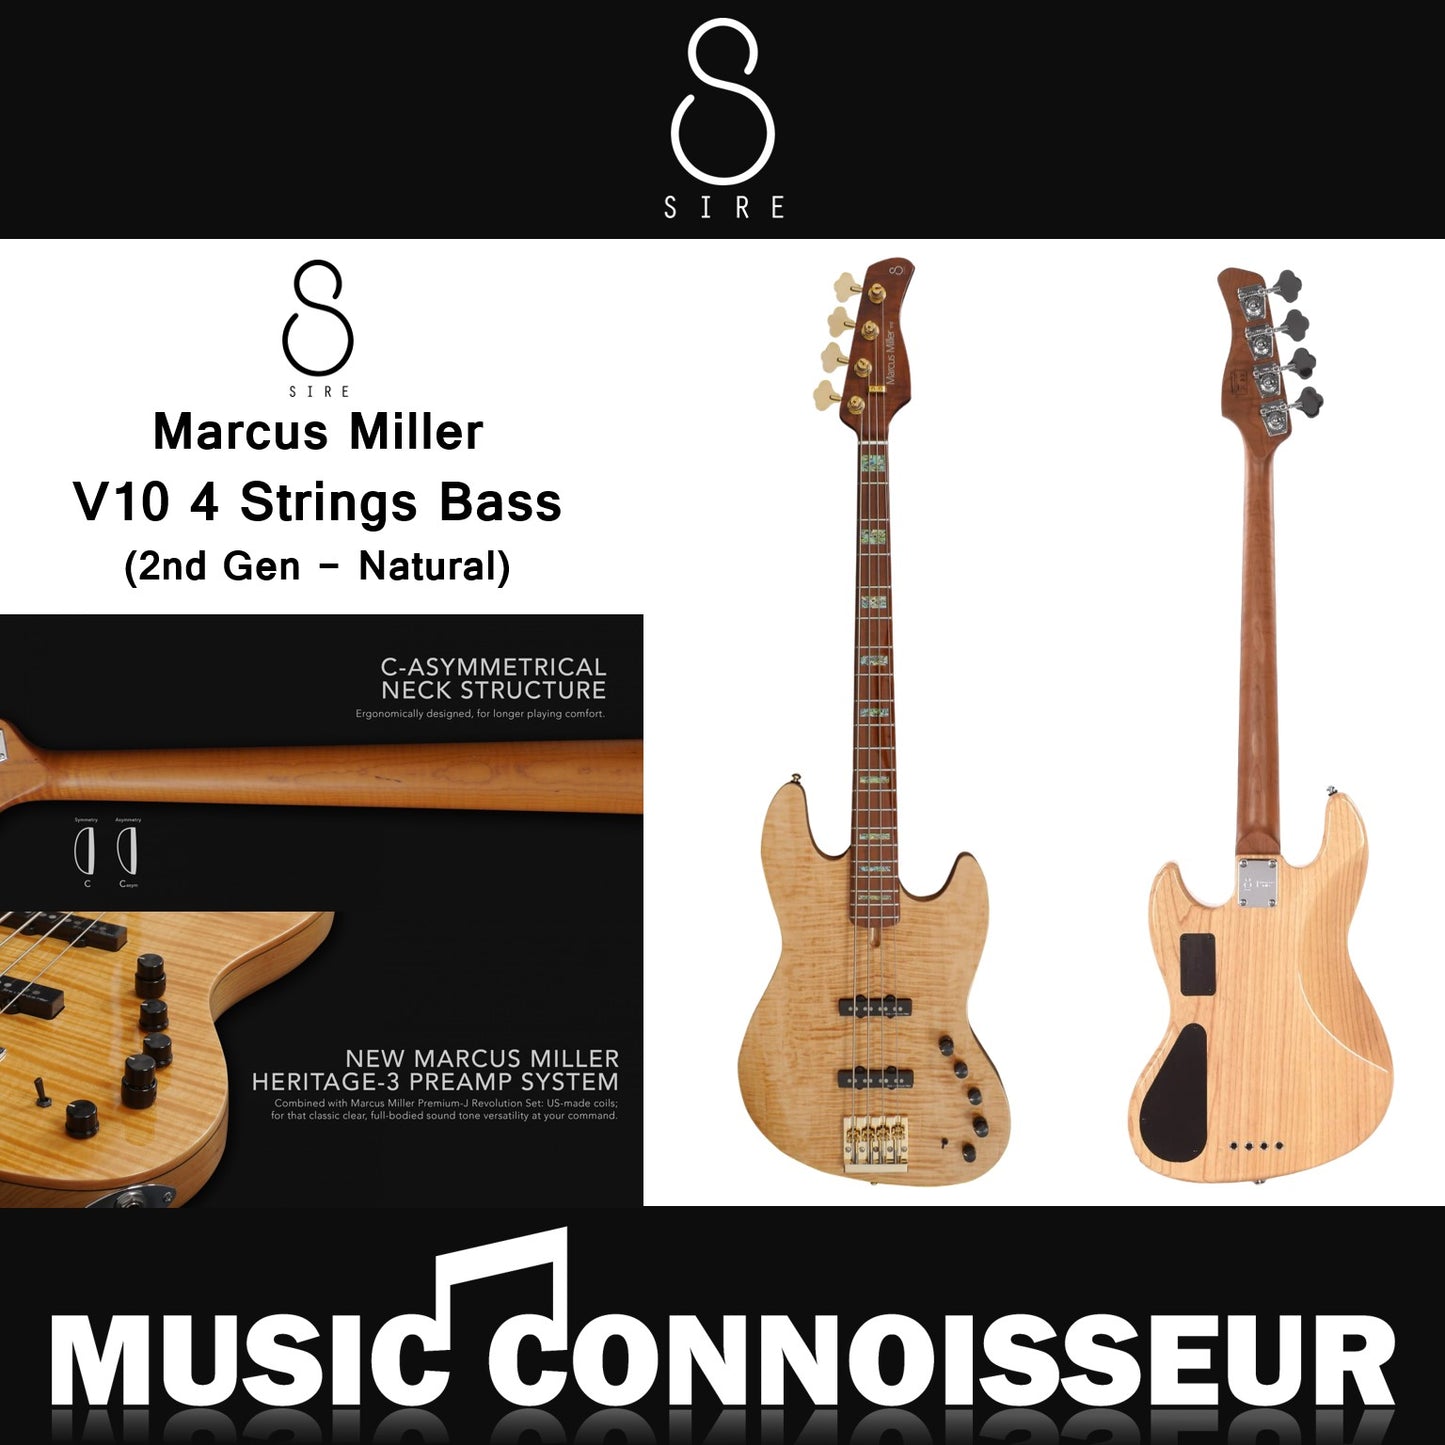 Sire Marcus Miller V10 4 Strings Bass (2nd Gen - Natural)